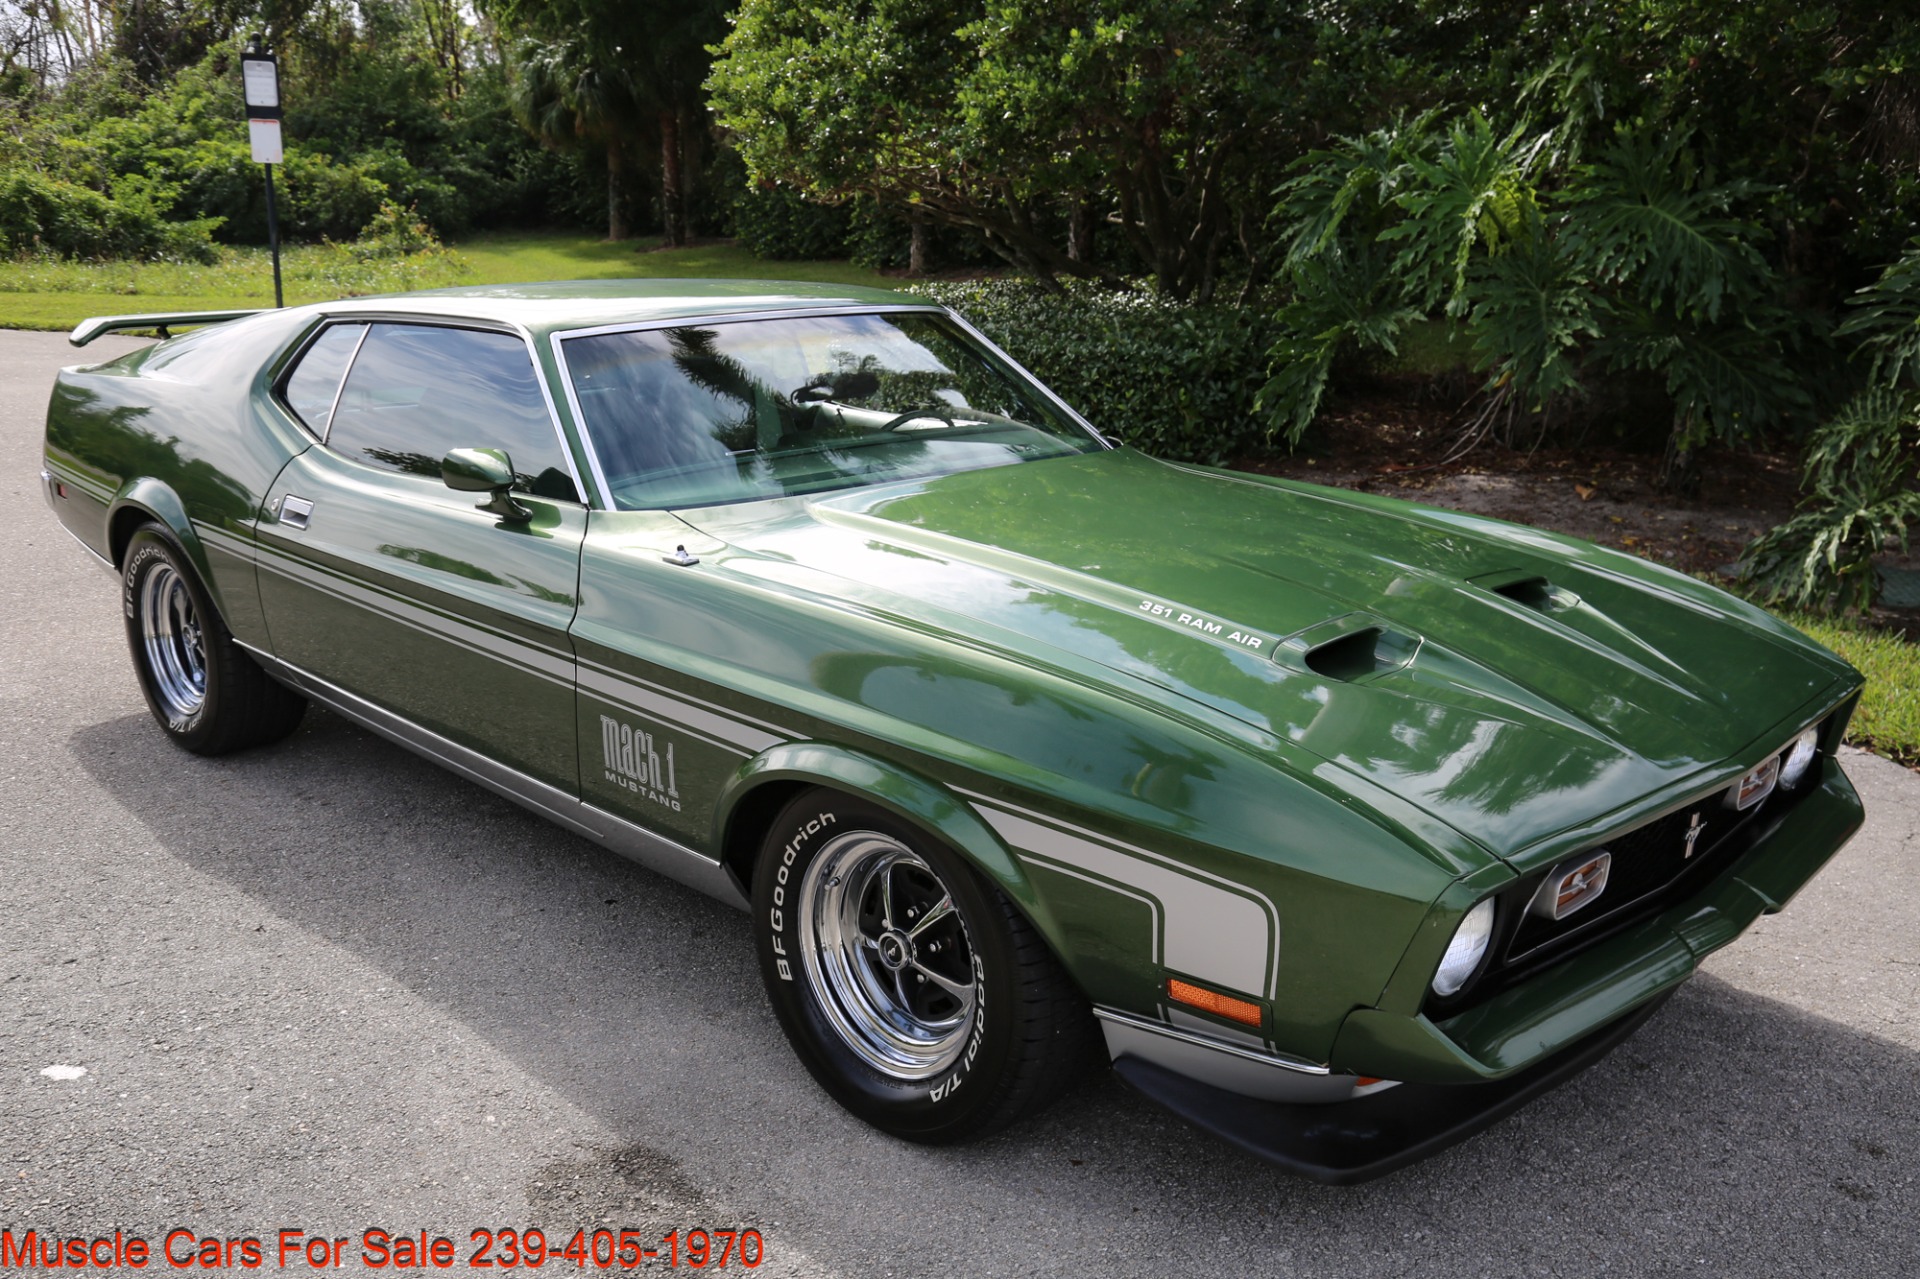 Used 1971 Ford Mustang MACH 1 For Sale ($39,000) | Muscle Cars for Sale ...